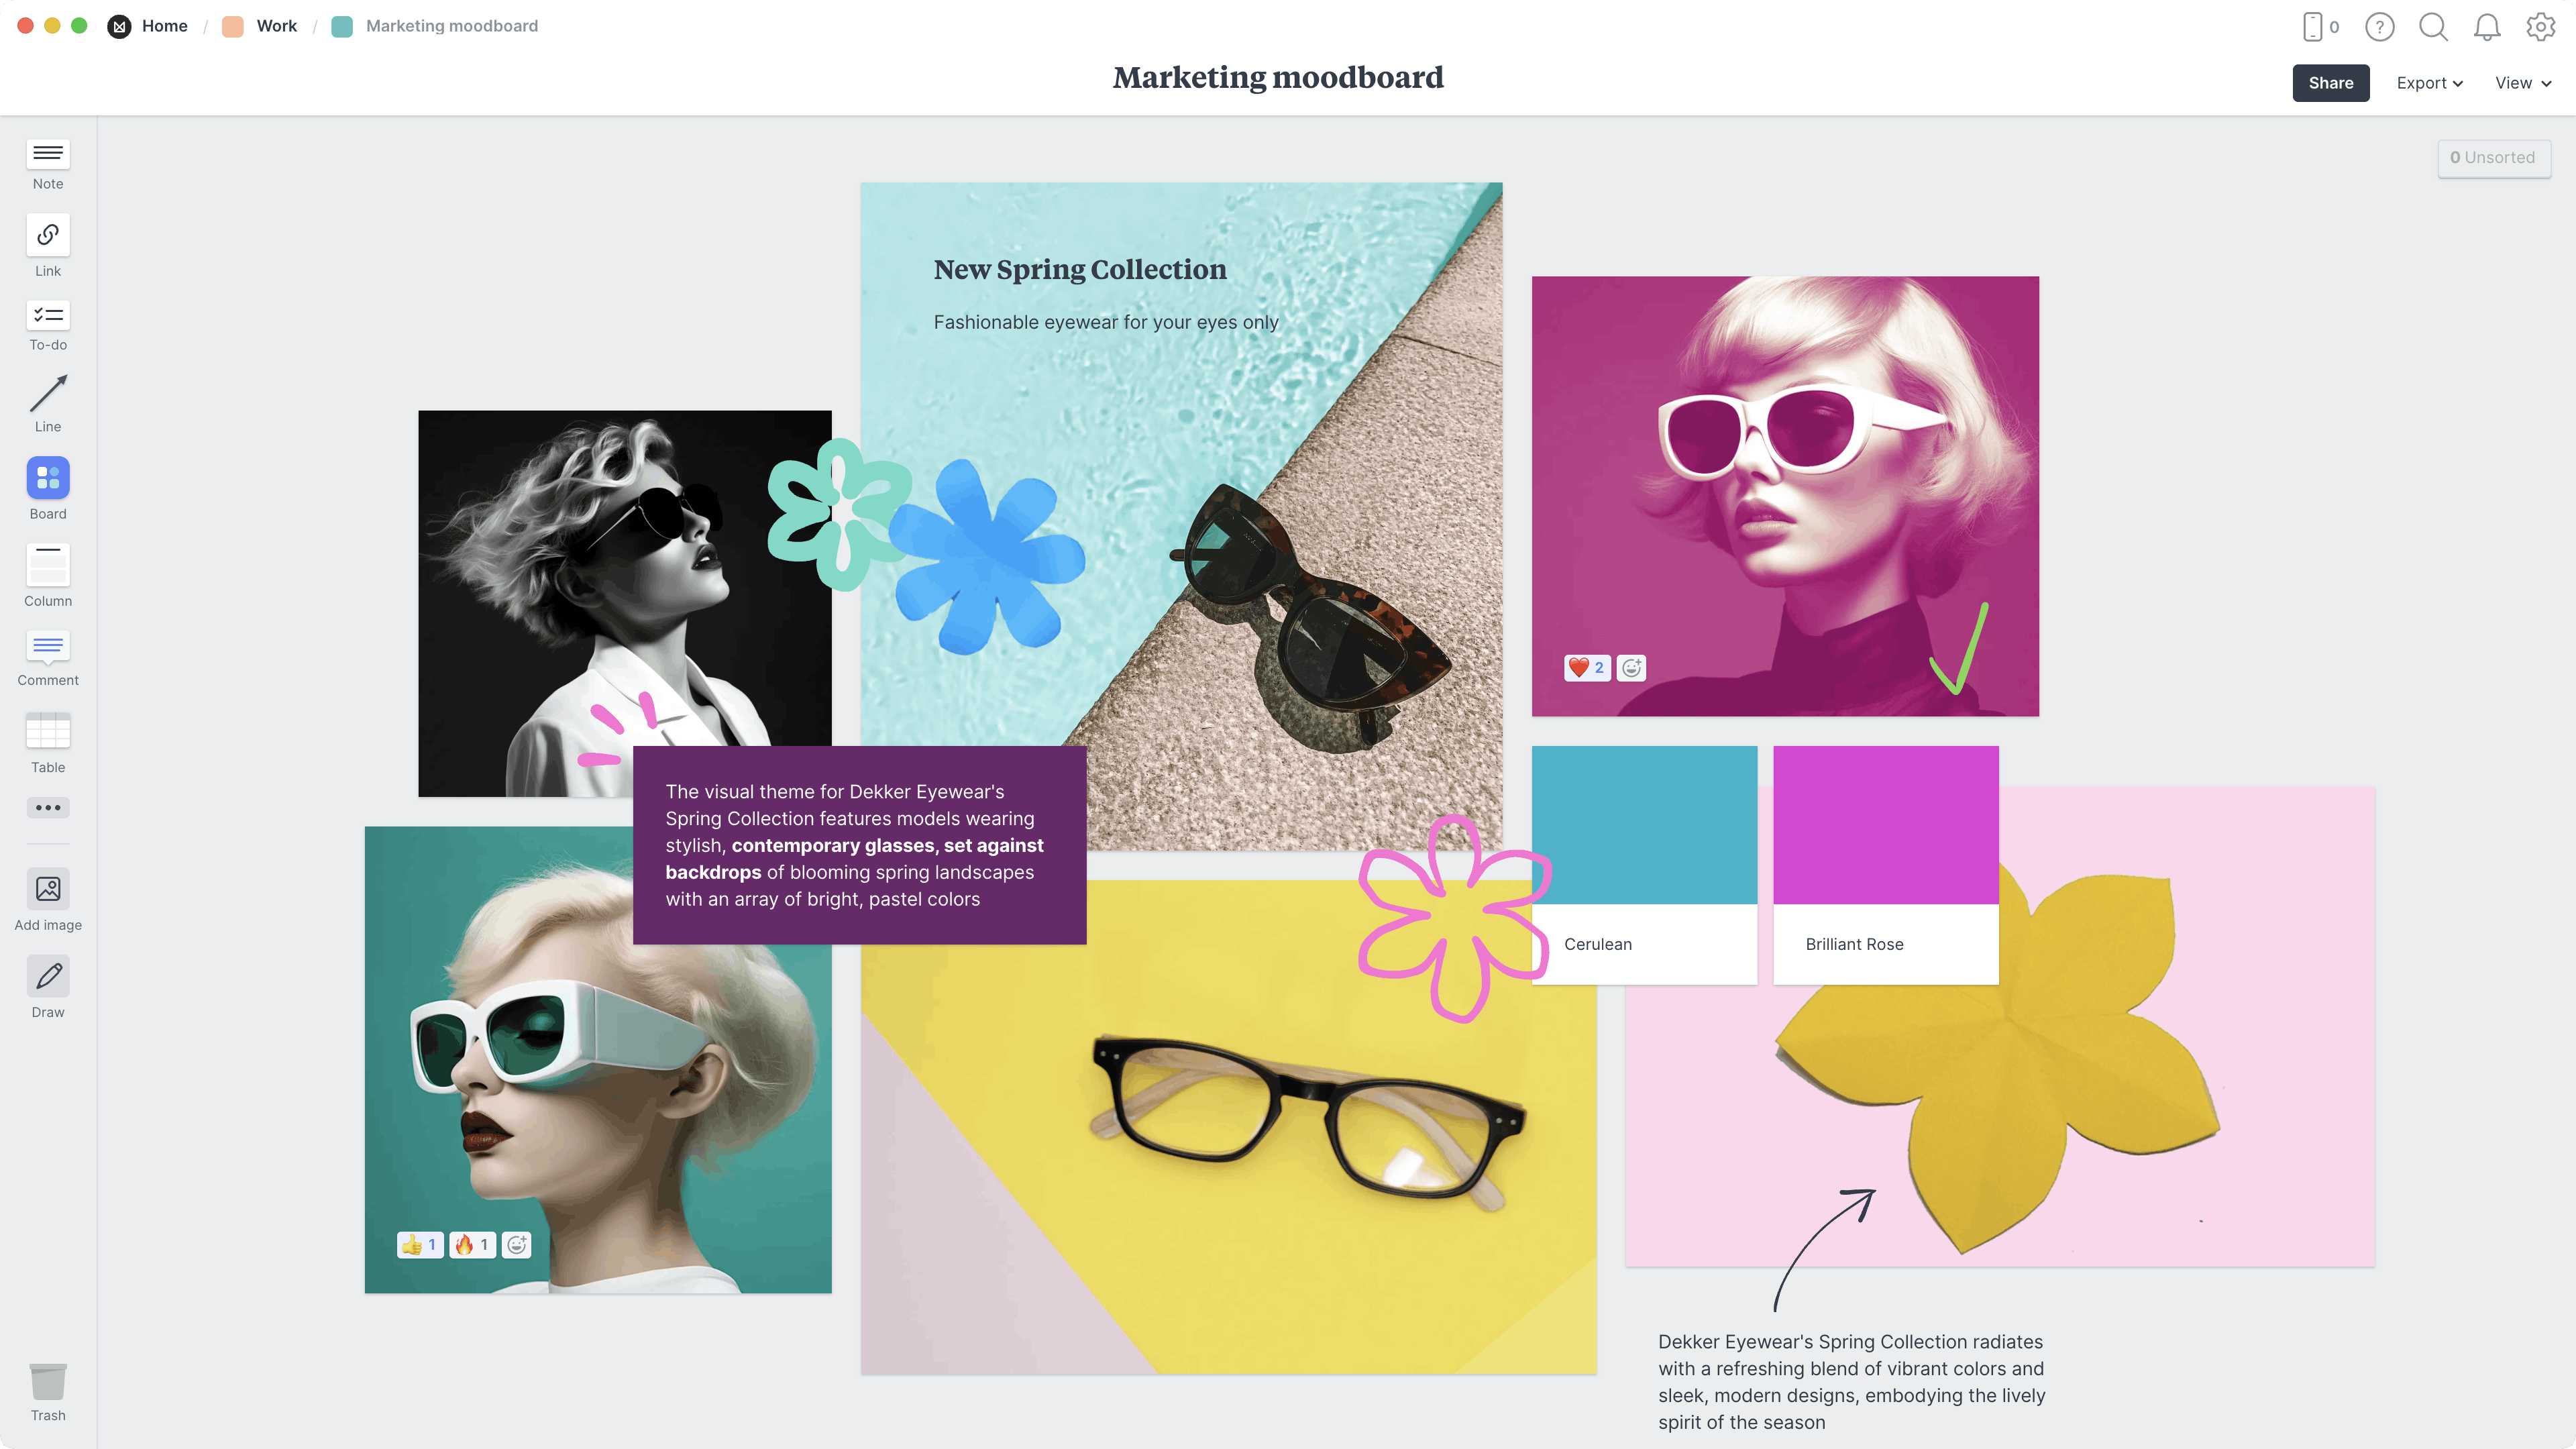 Marketing Campaign Moodboard Template, within the Milanote app